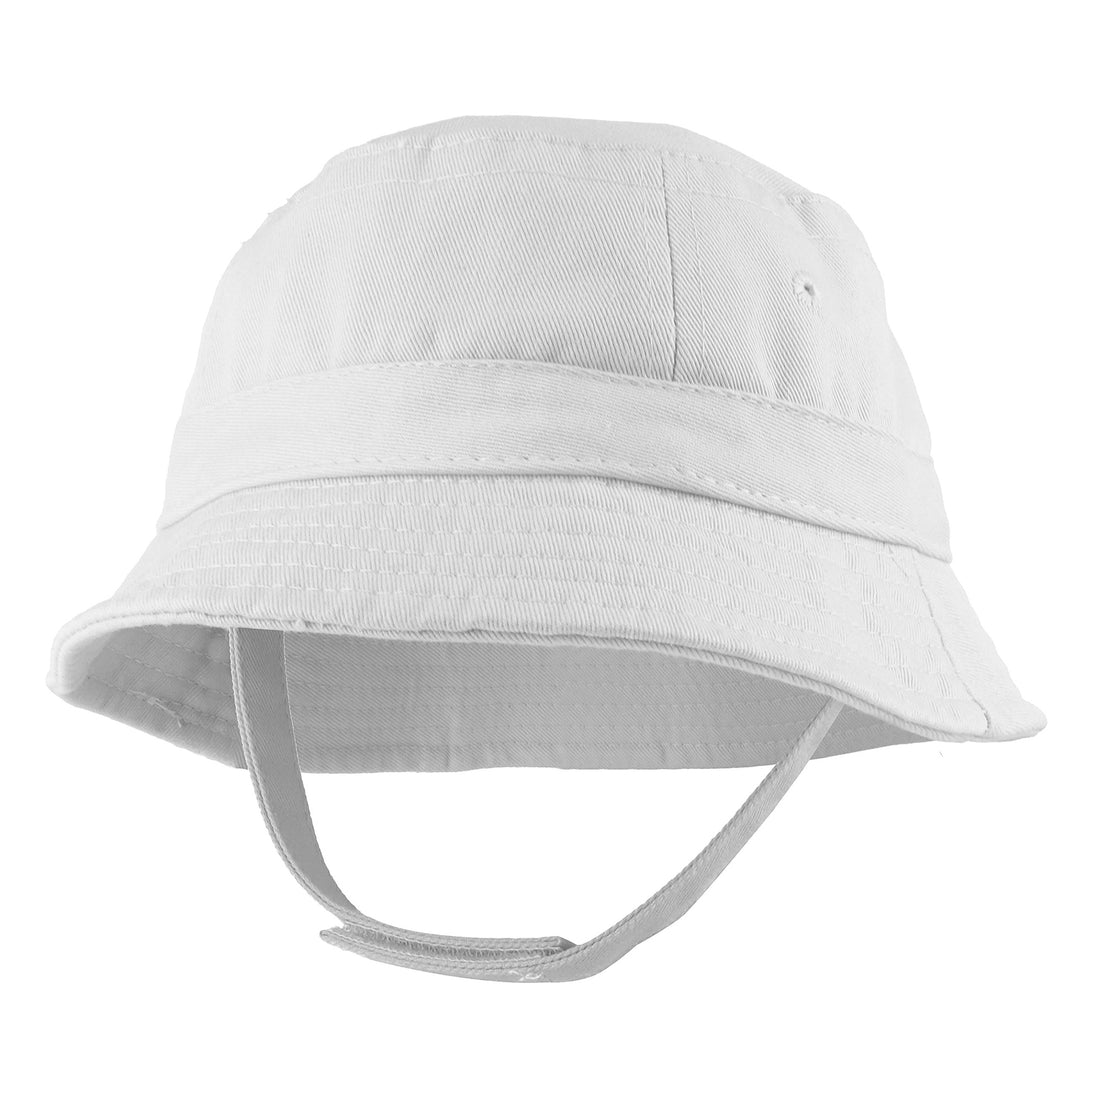 Trendy Apparel Shop Infant Baby's 100% Cotton Bucket Hat with Adjustable Chin Strap